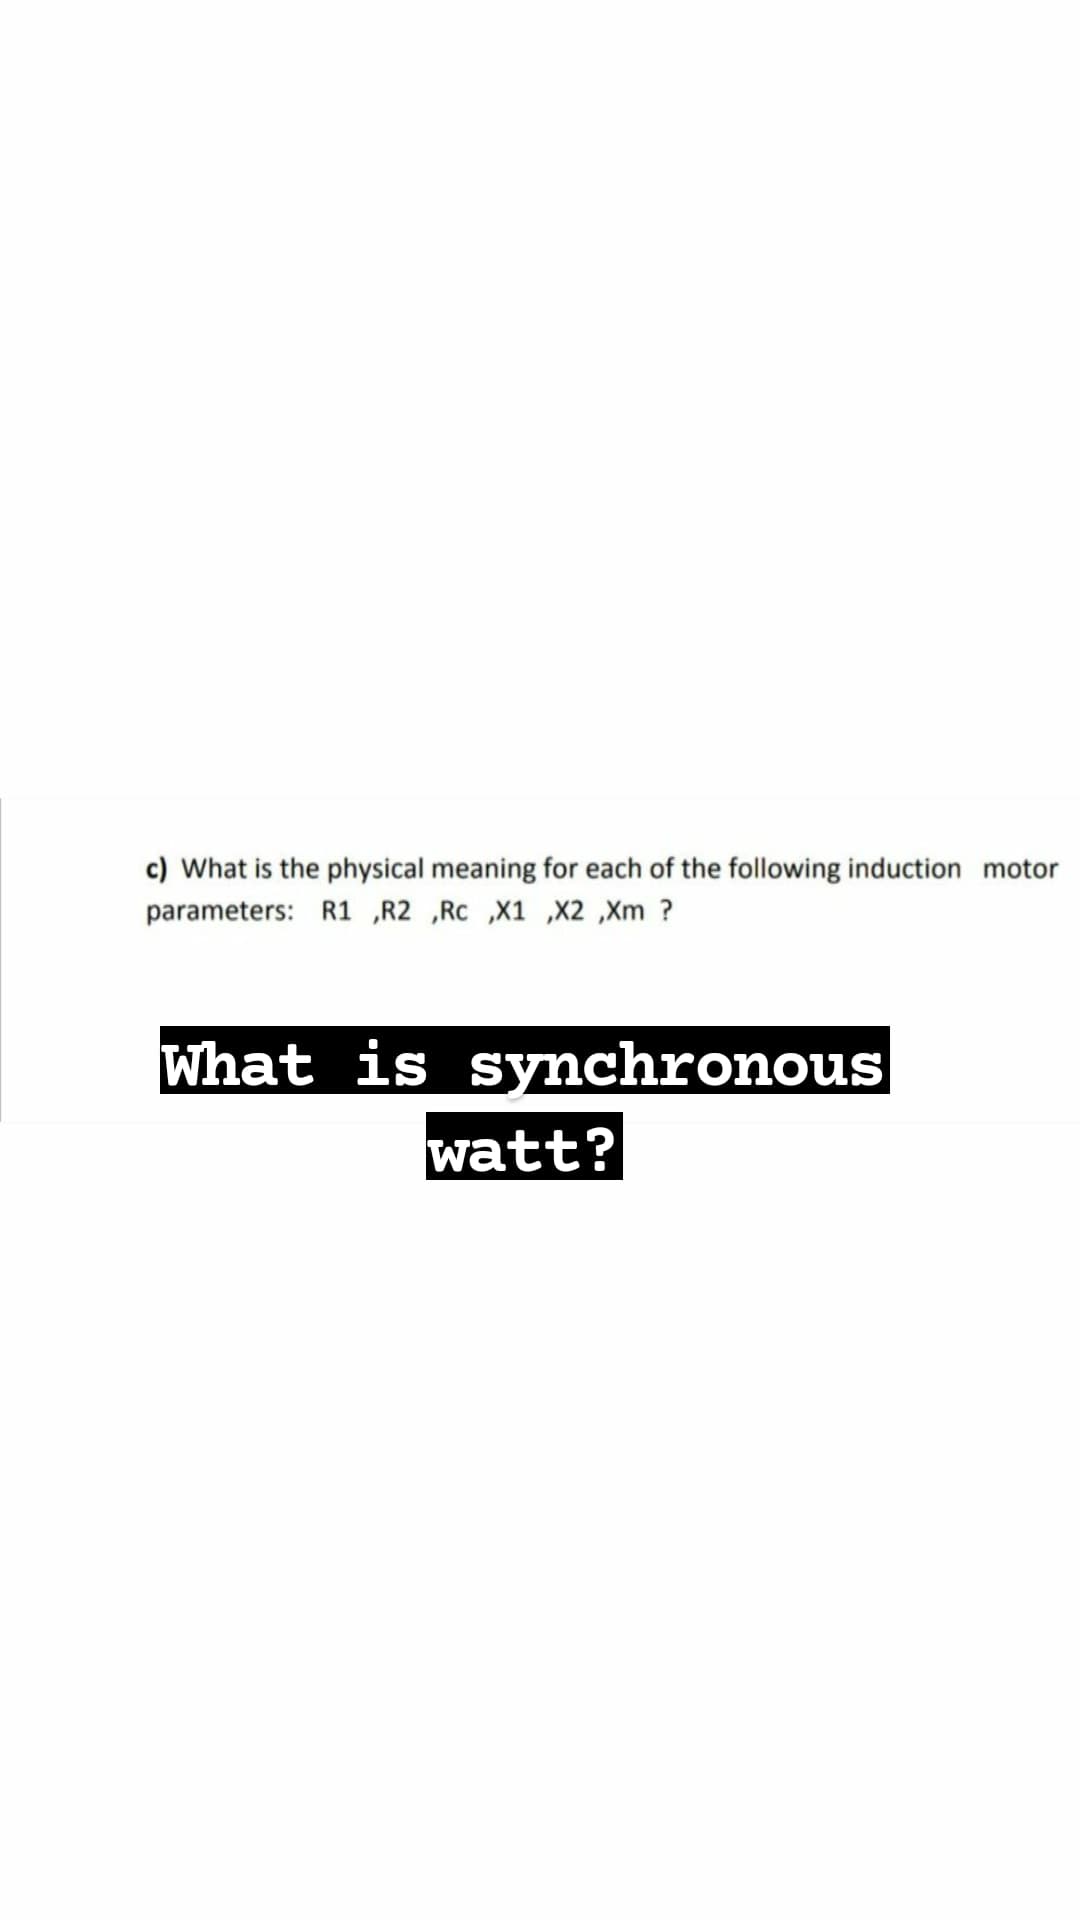 c) What is the physical meaning for each of the following induction motor
parameters: R1 „R2 ,Rc ,X1 ,X2 ,Xm ?
What is synchronous
watt?
